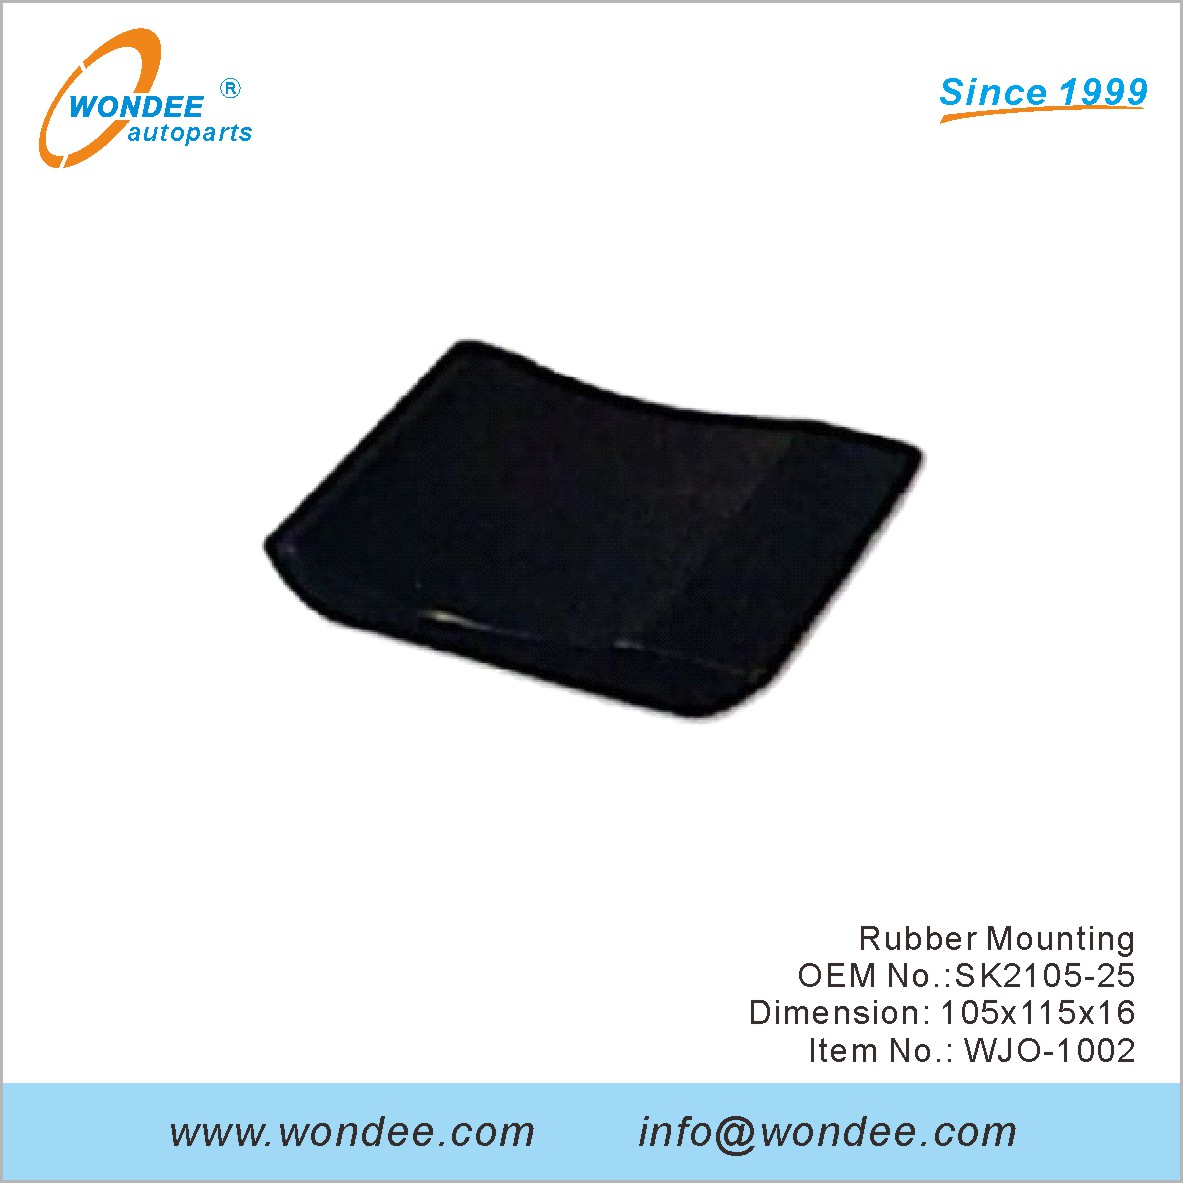 Rubber Mounting OEM SK2105-25 for JOST from WONDEE